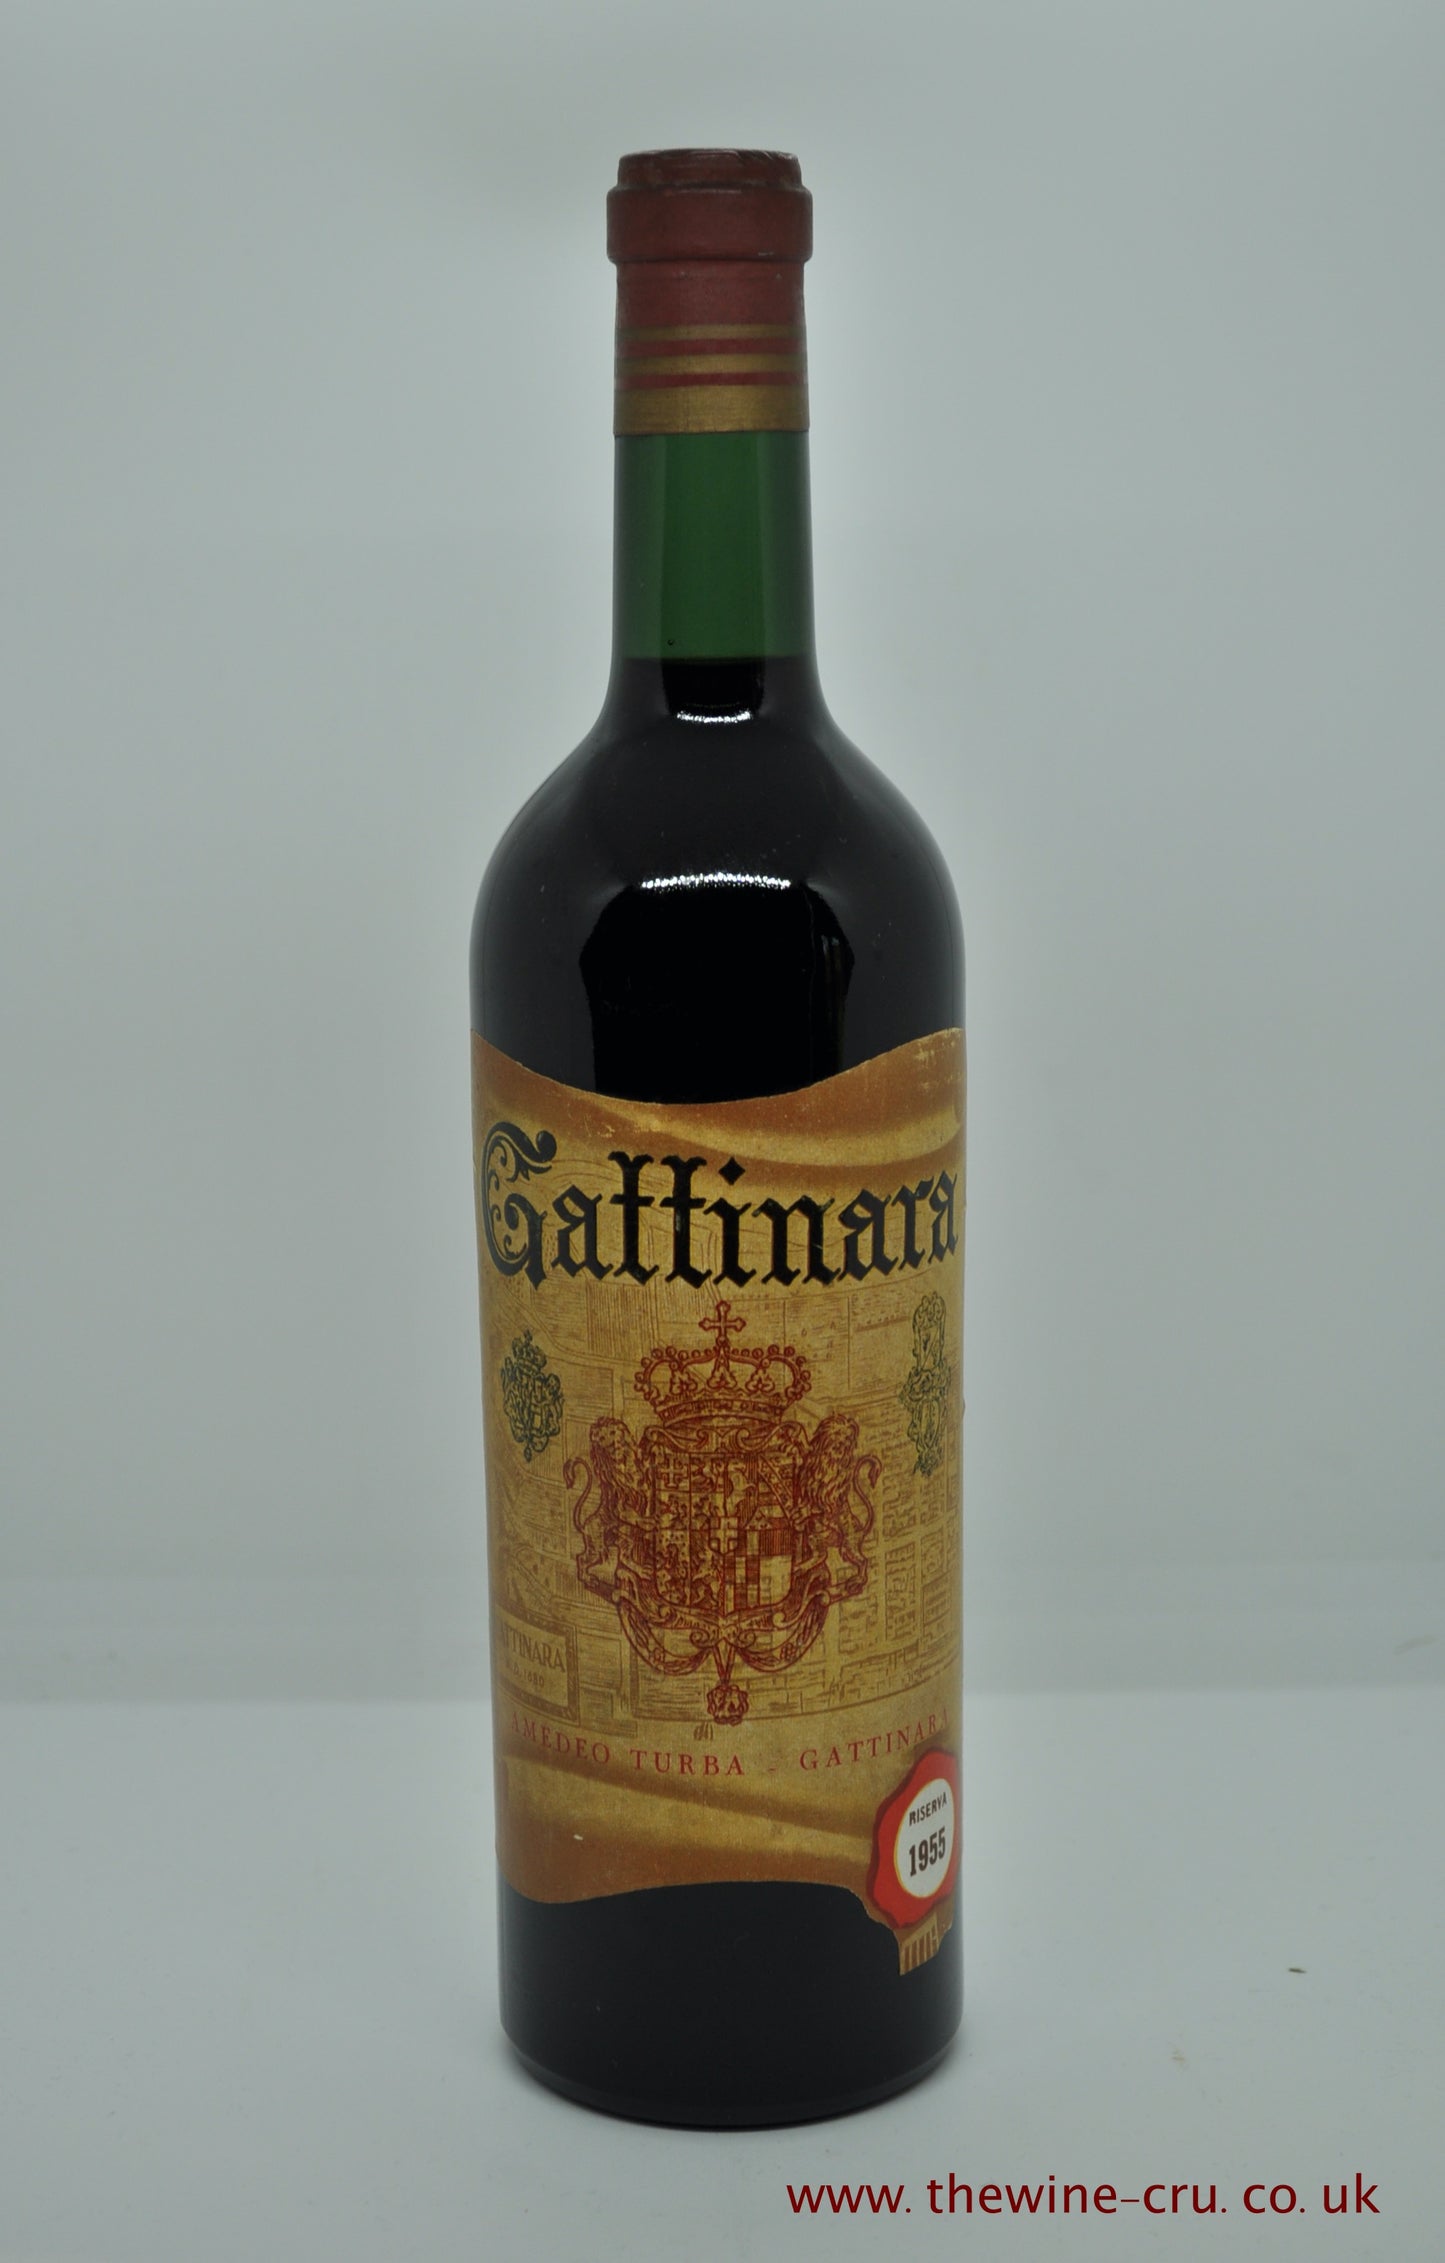 A bottle of 1955 vintage red wine. Amedeo Turba Gattinara Riserva 1955. Capsule and label very good. The wine level is into the neck. Immediate delivery. Free local delivery. Gift wrapping available.